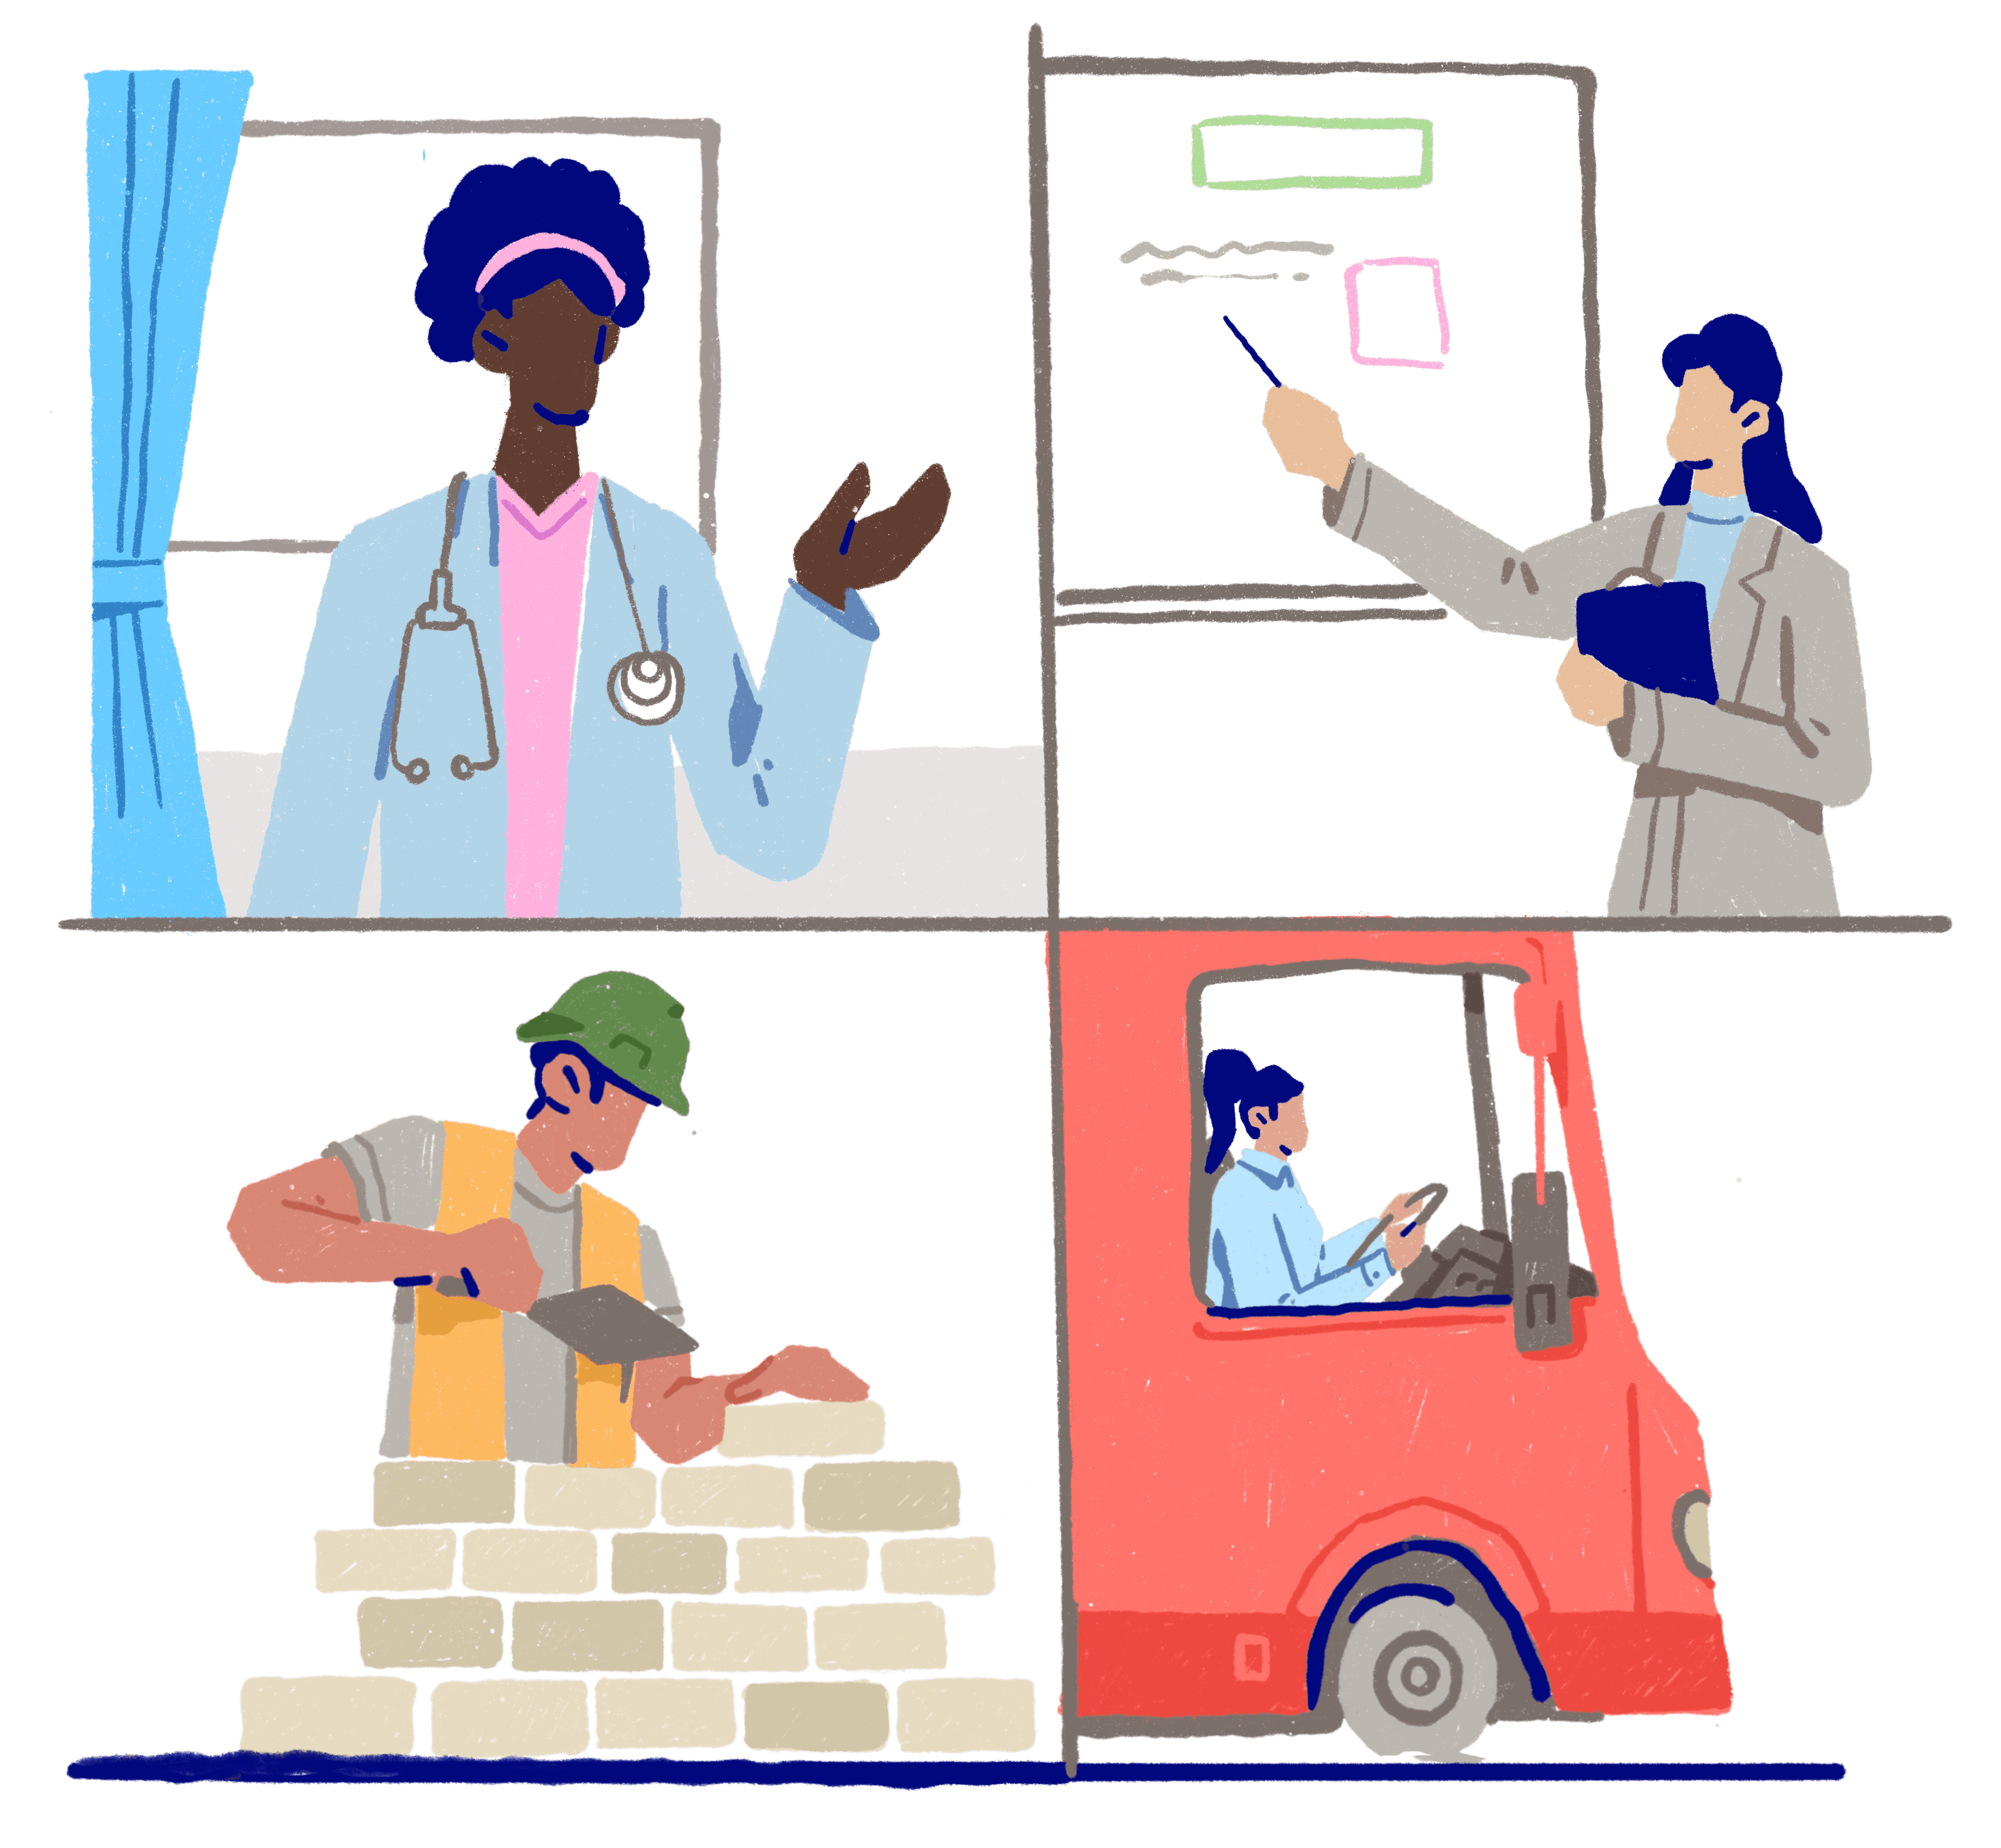 Images of a doctor, someone doing a presentation, a brick-layer and a bus driver